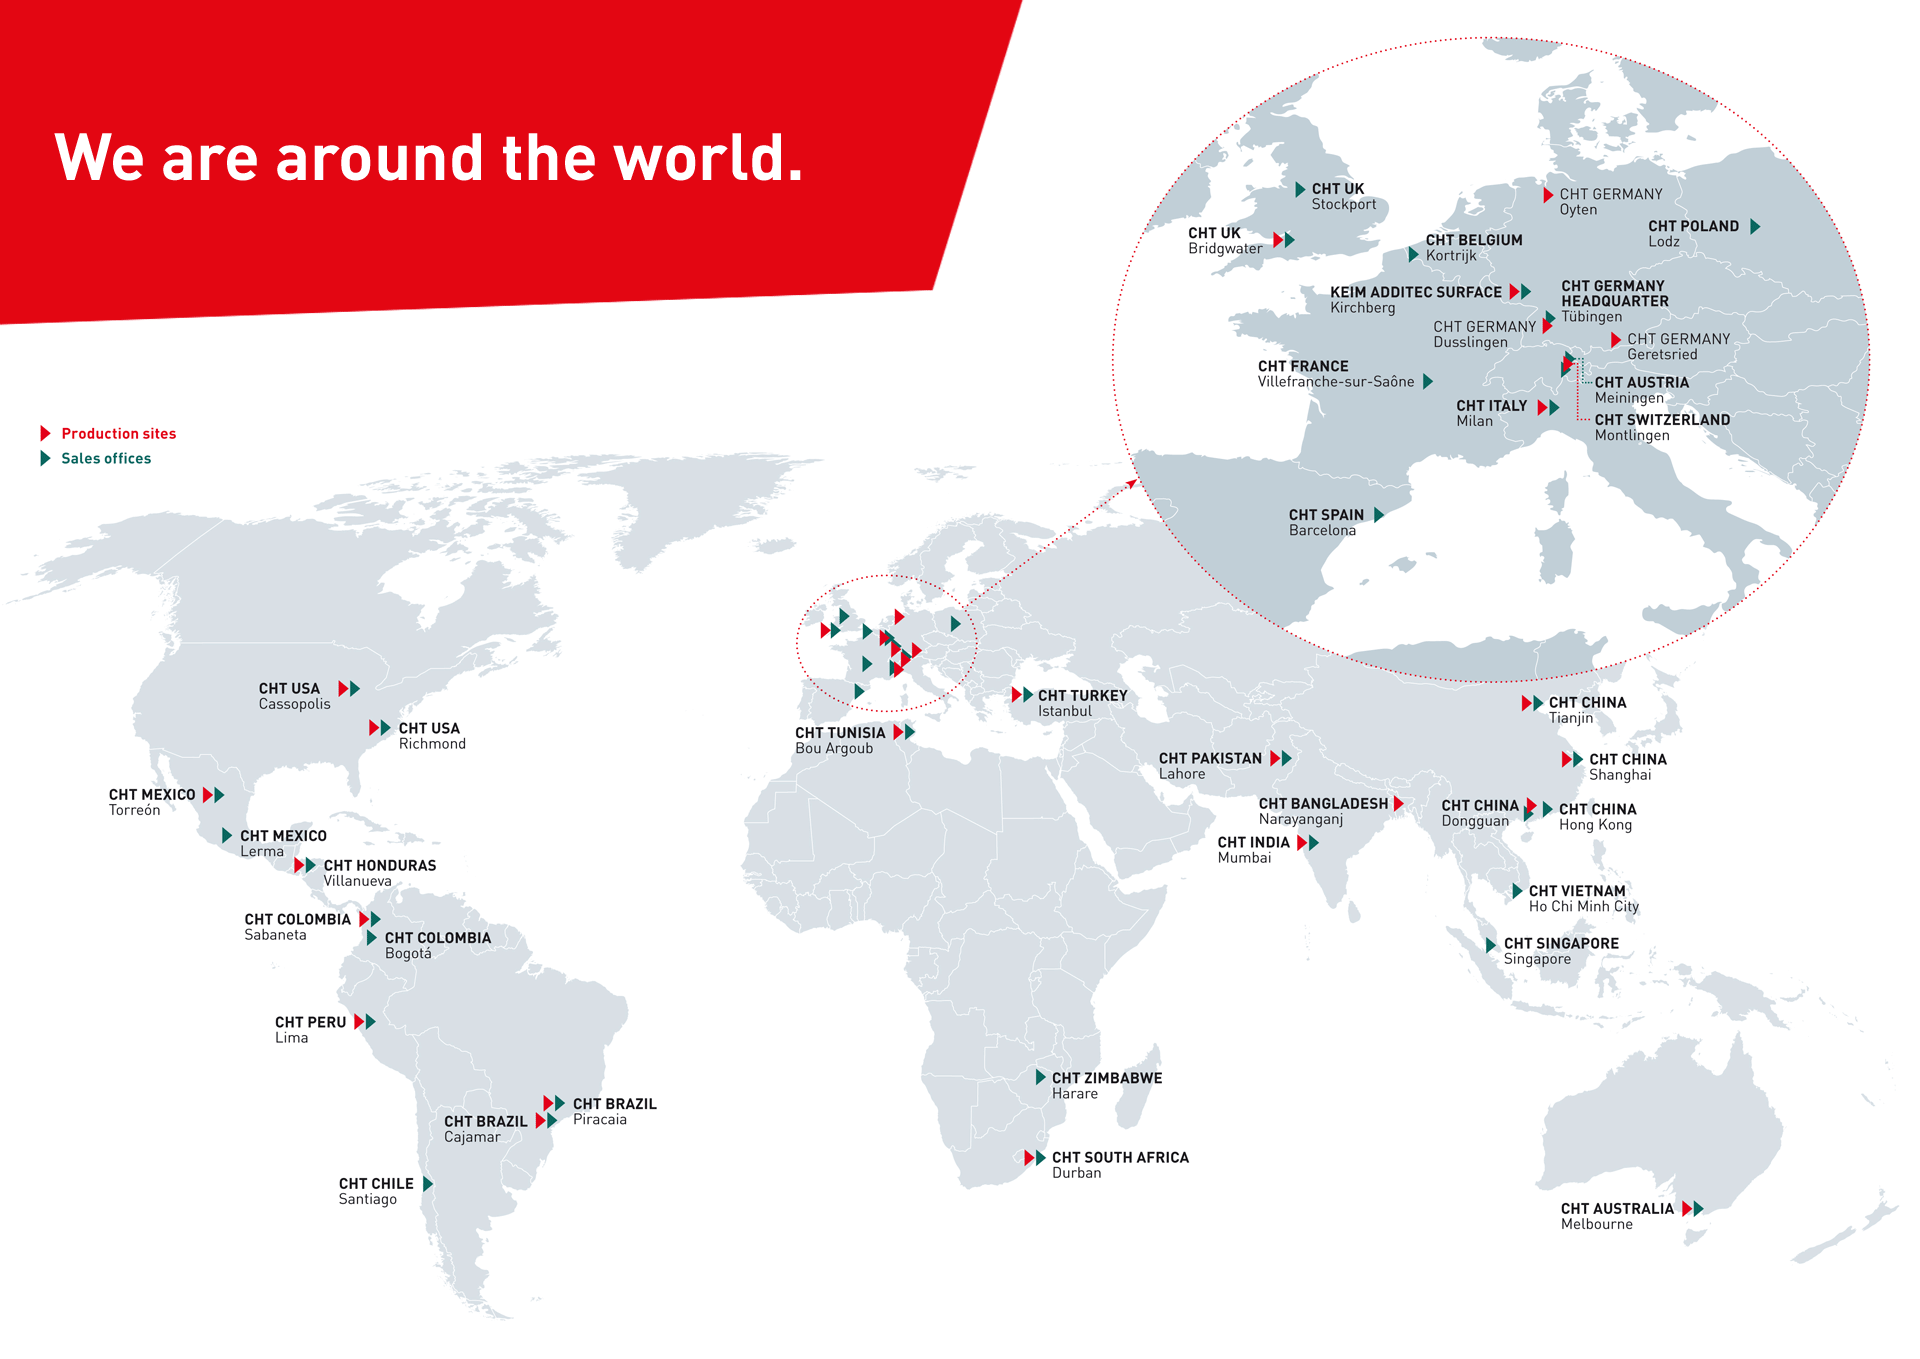 World map with the locations of the CHT Group